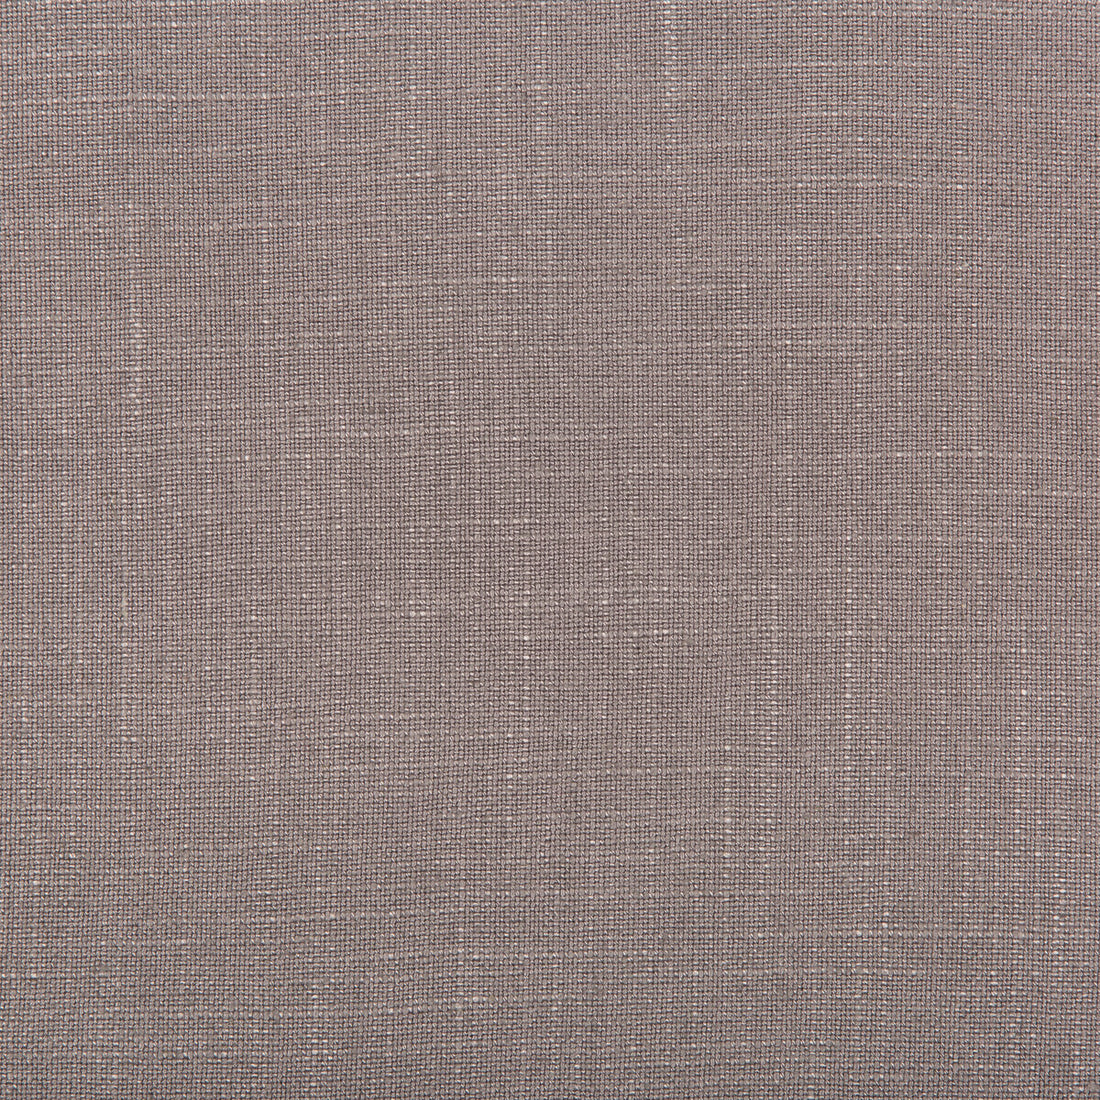 Aura fabric in lilac color - pattern 35520.10.0 - by Kravet Design